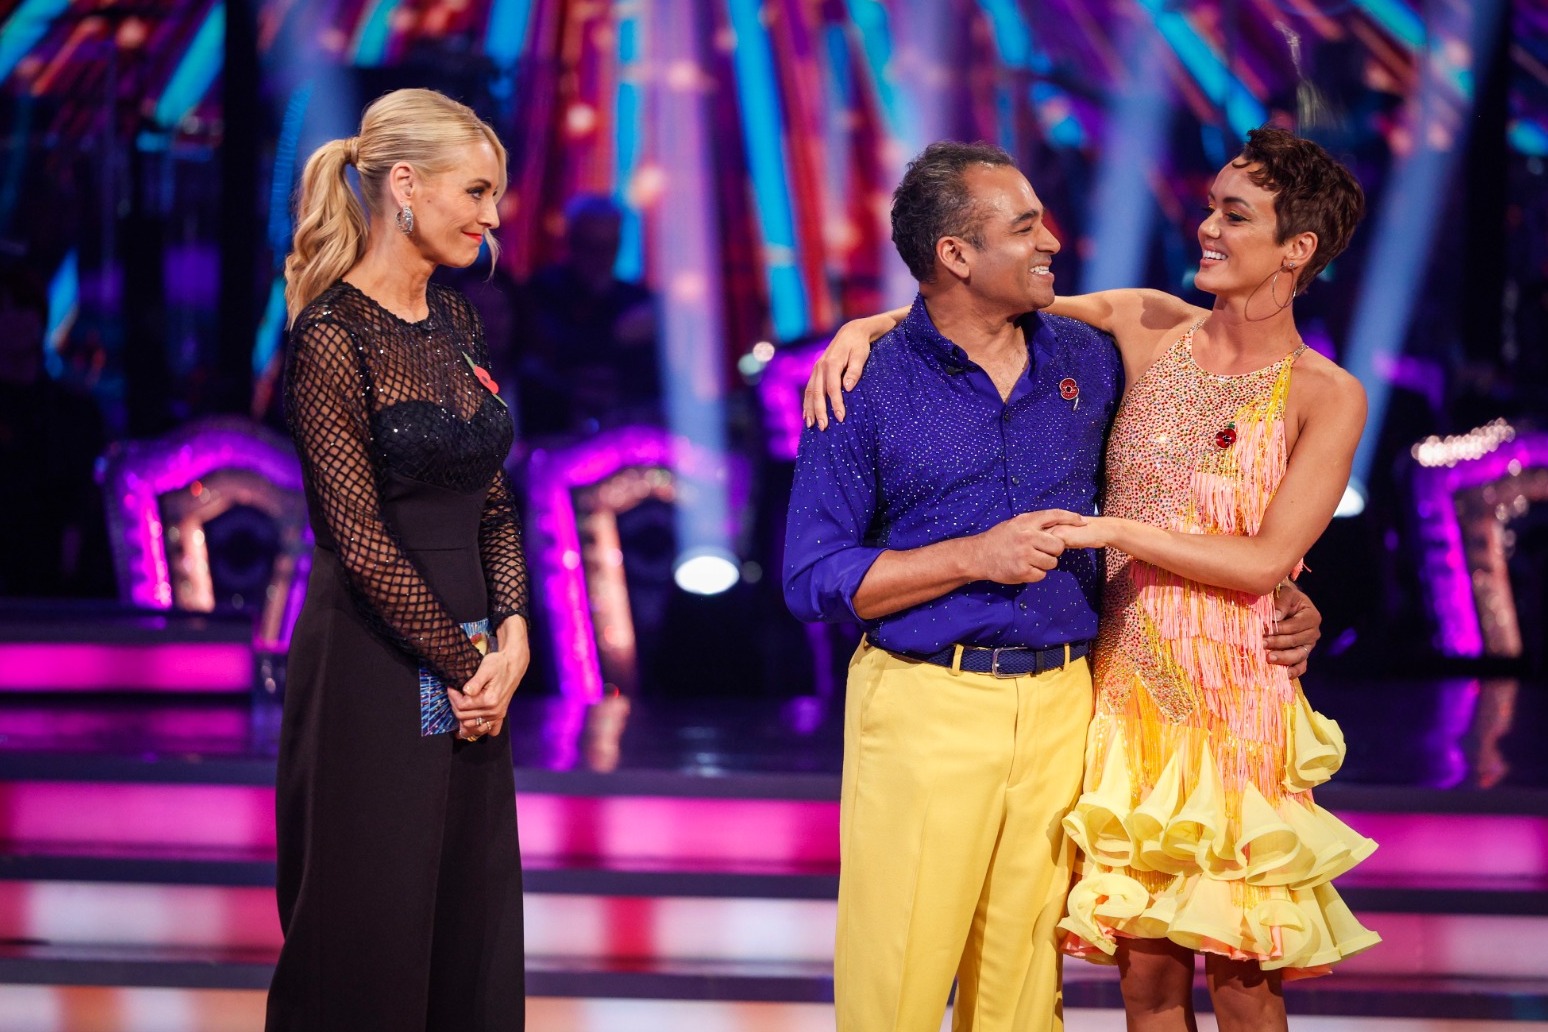 Seventh celebrity eliminated from Strictly says ‘It’s right I am going out’ 